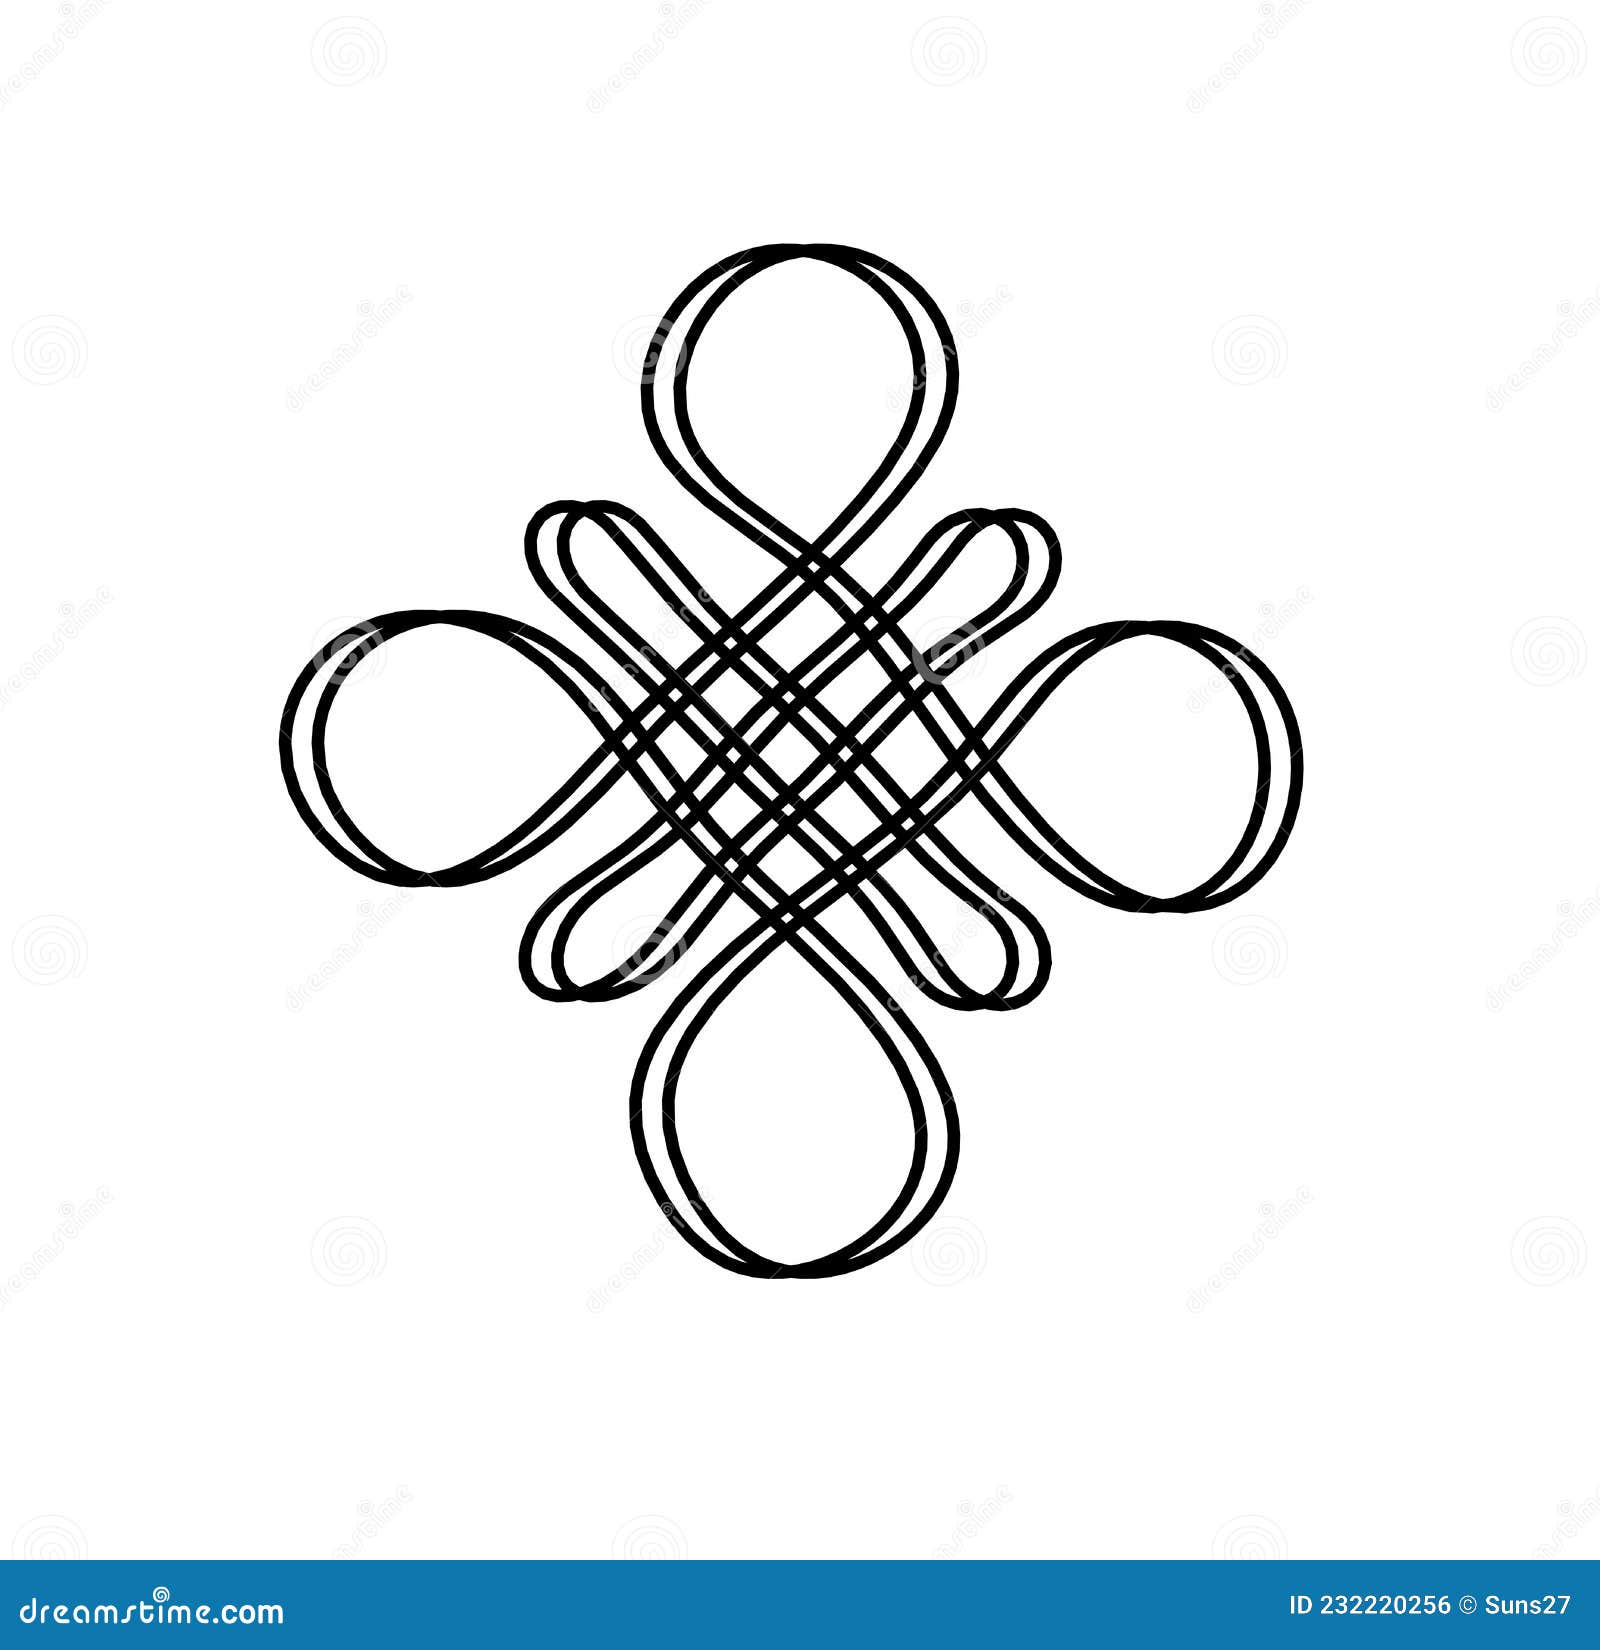 Sign of Endless Auspicious Knot As Line Drawing Stock Vector ...